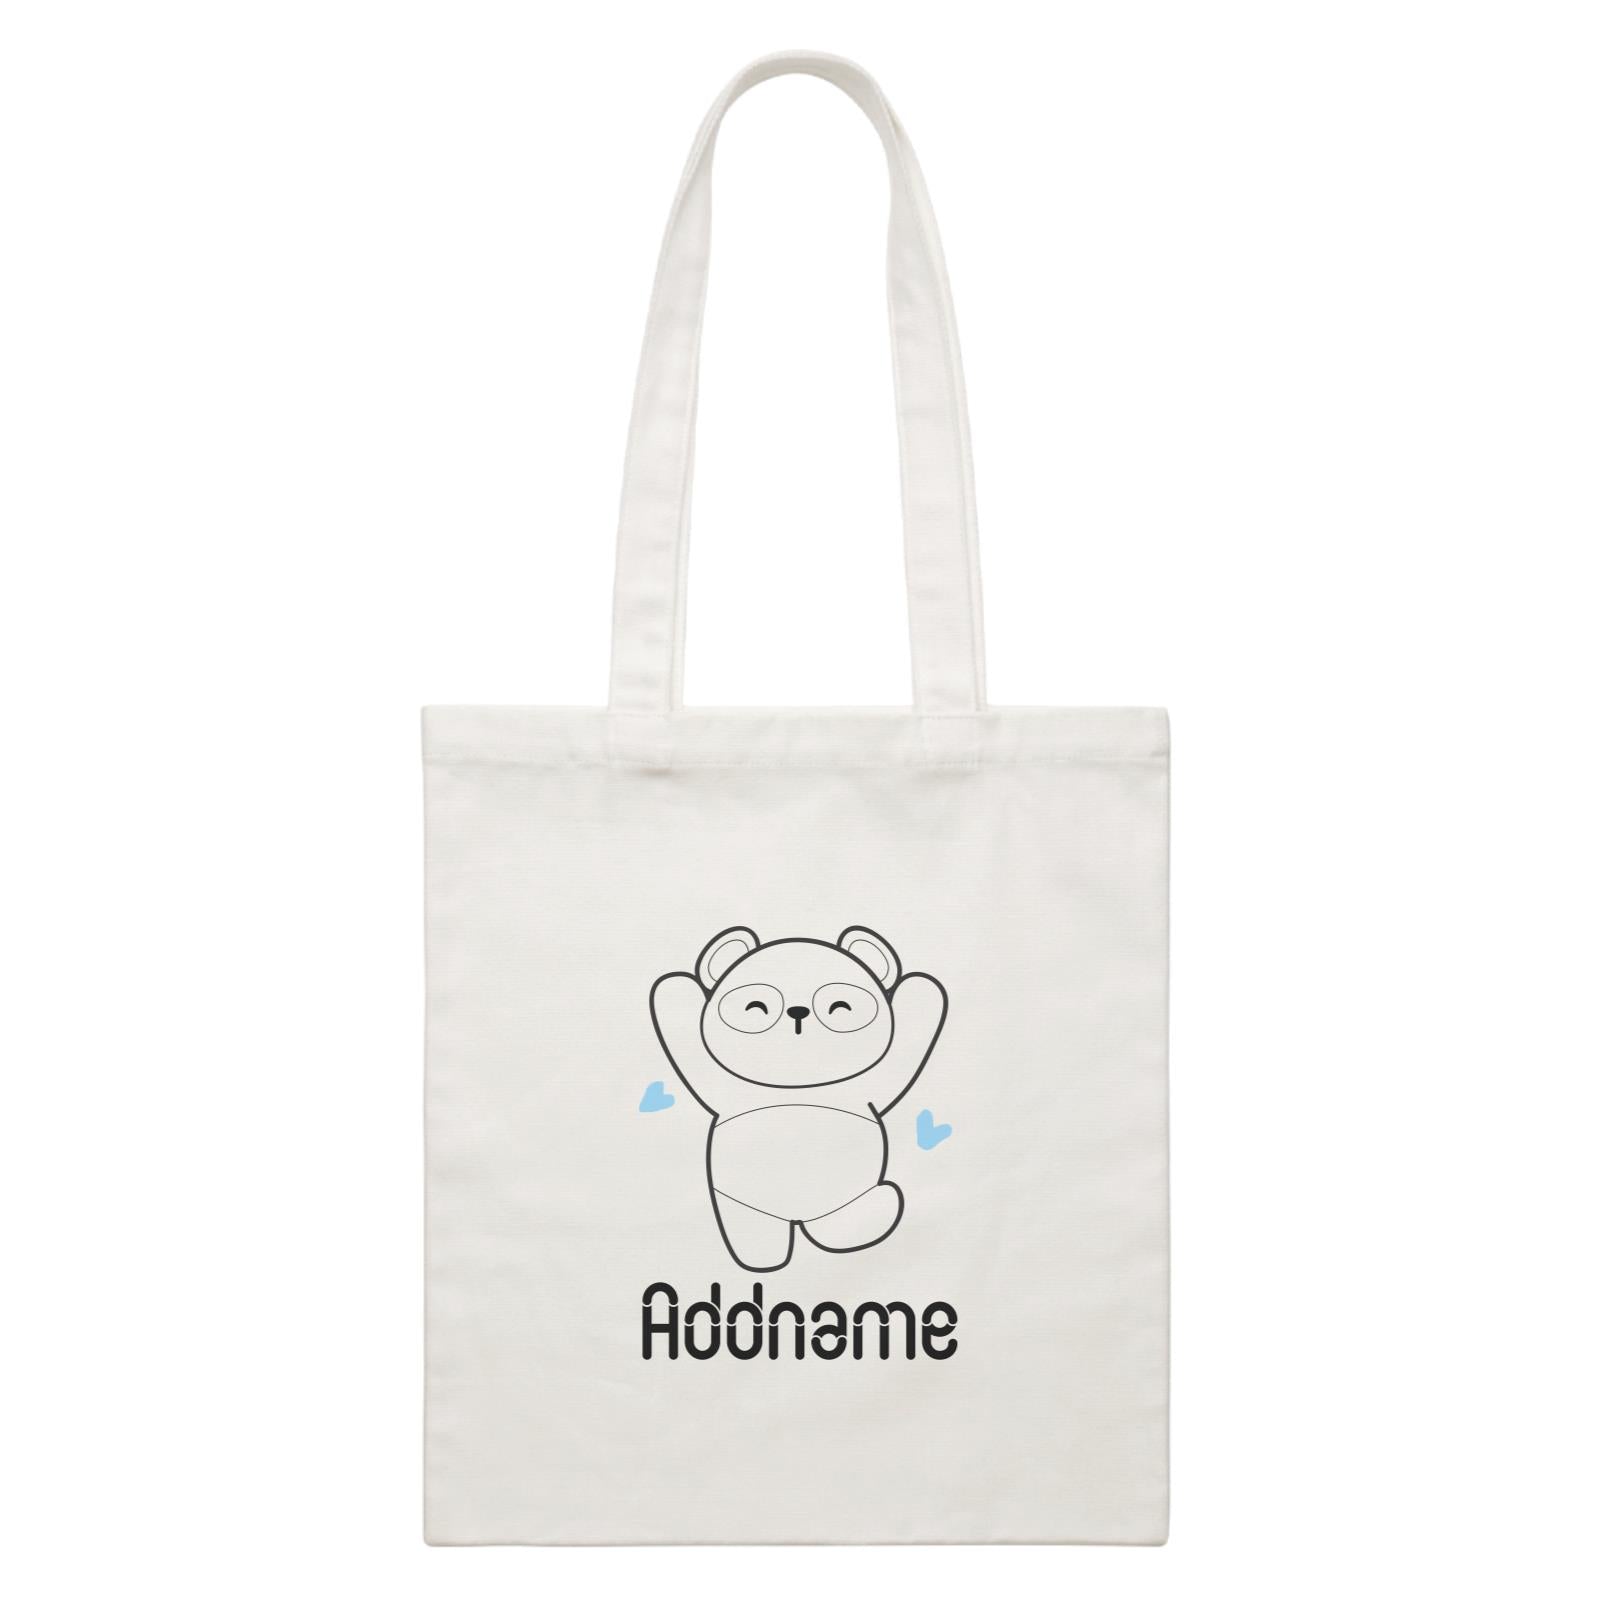 Coloring Outline Cute Hand Drawn Animals Cute Panda Jumps With Joy Addname White White Canvas Bag